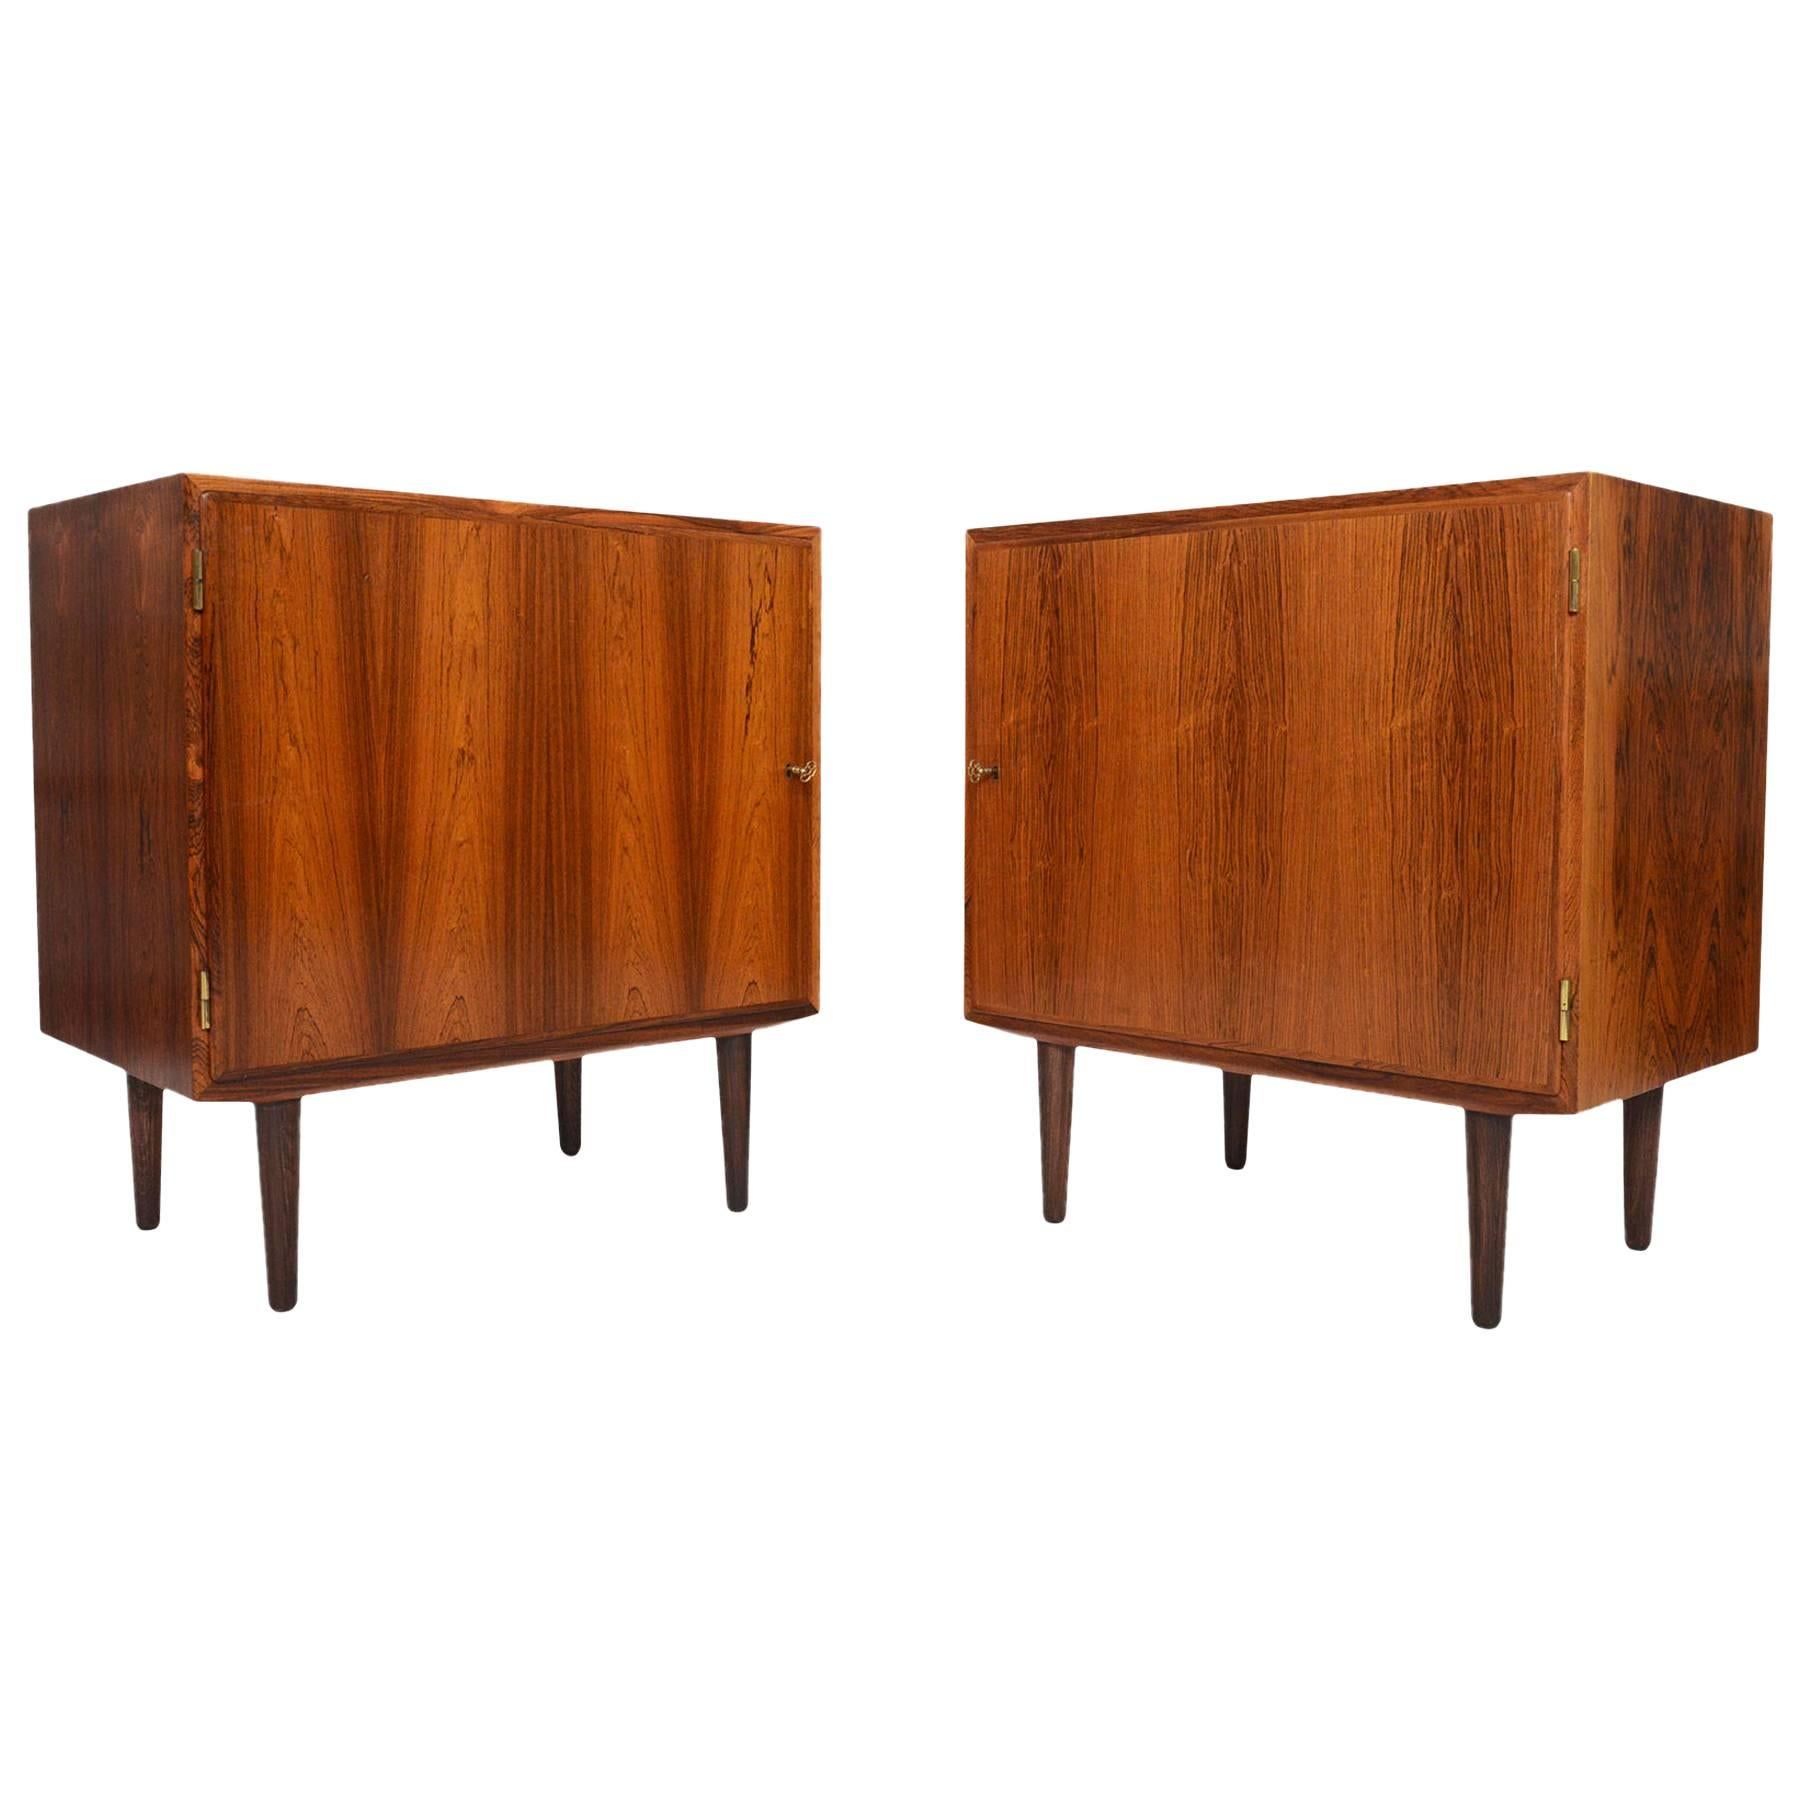 Pair of Carlo Jensen for Poul Hundevad Rosewood Nightstands